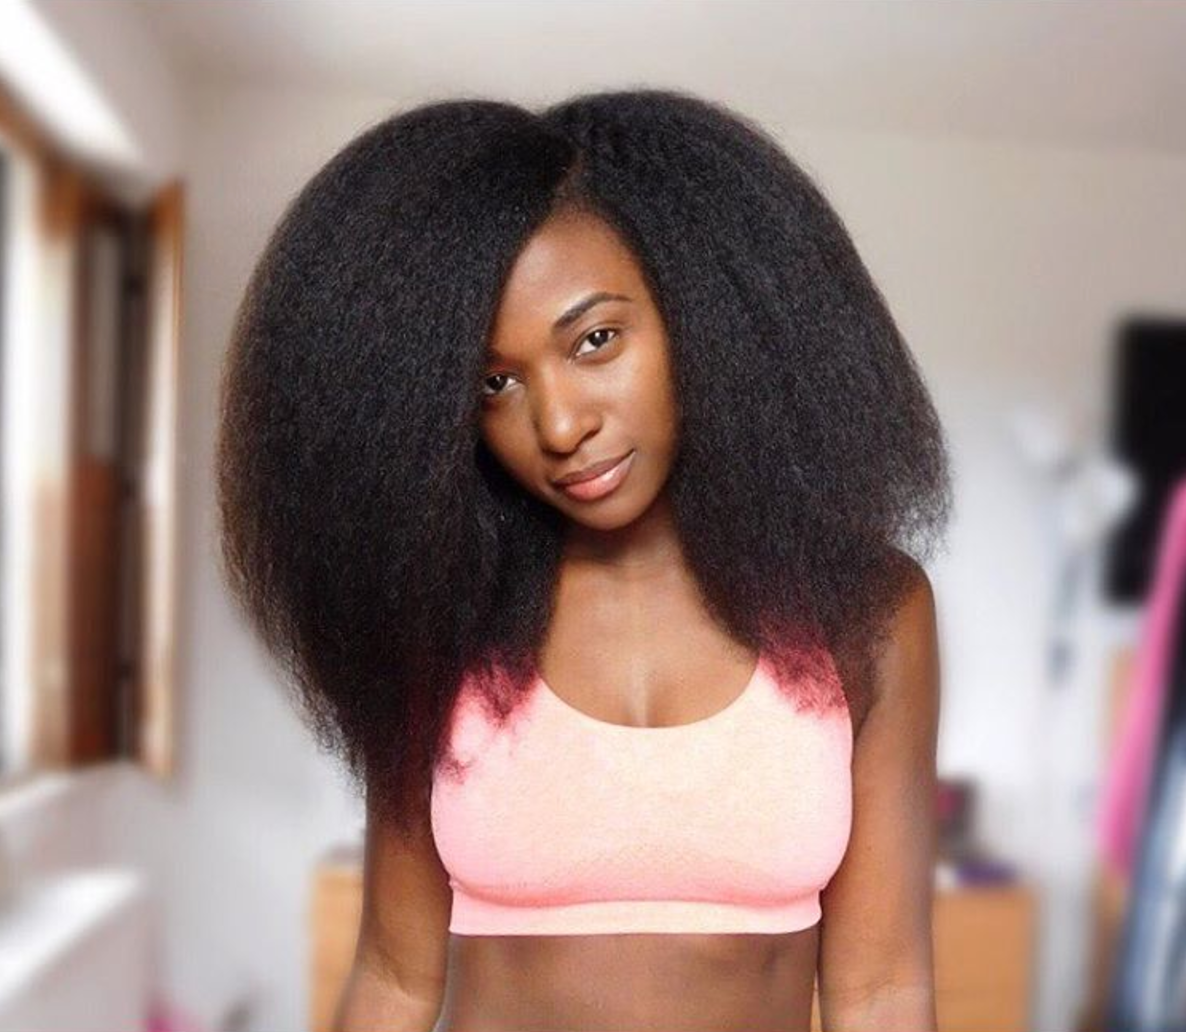 Keratin Treatment For Afro Hair Review Brazilian Blow Dry On Afro Hair   Glamour UK